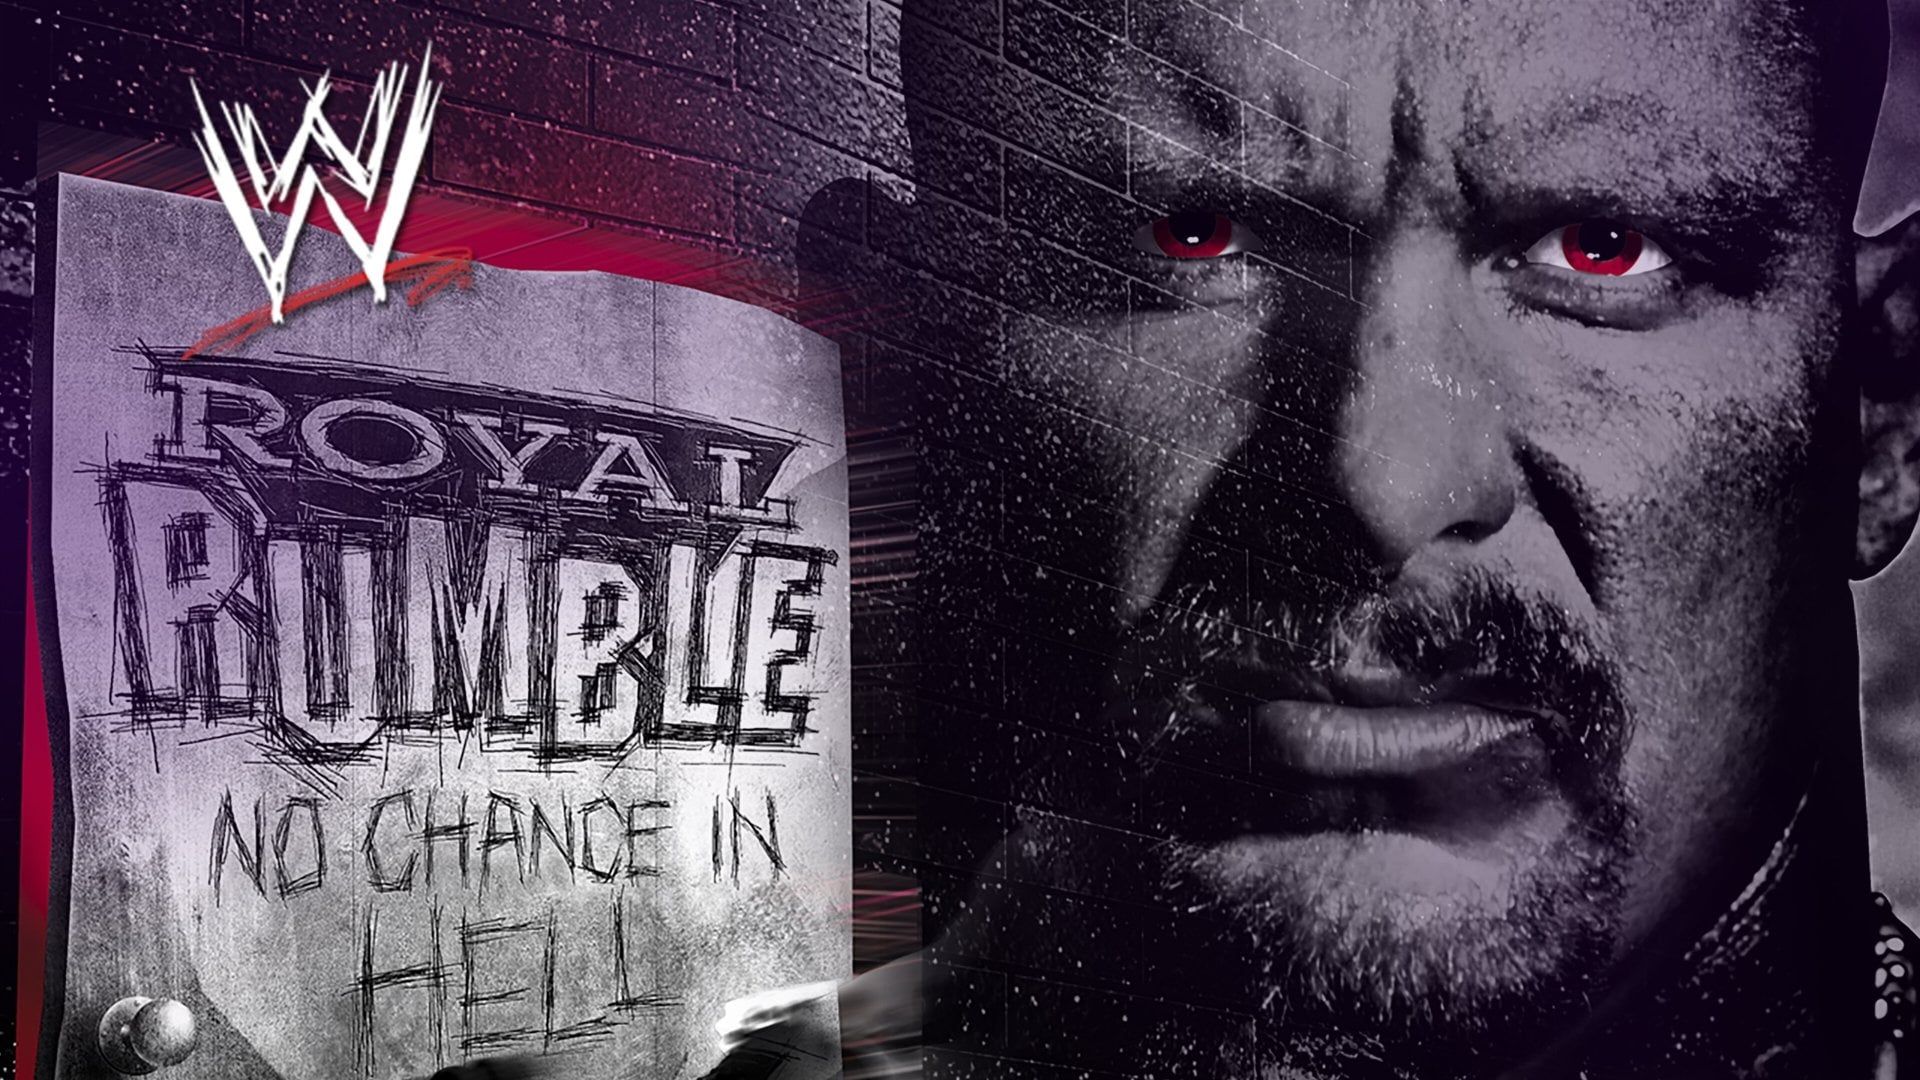 WWF Royal Rumble: No Chance in Hell background